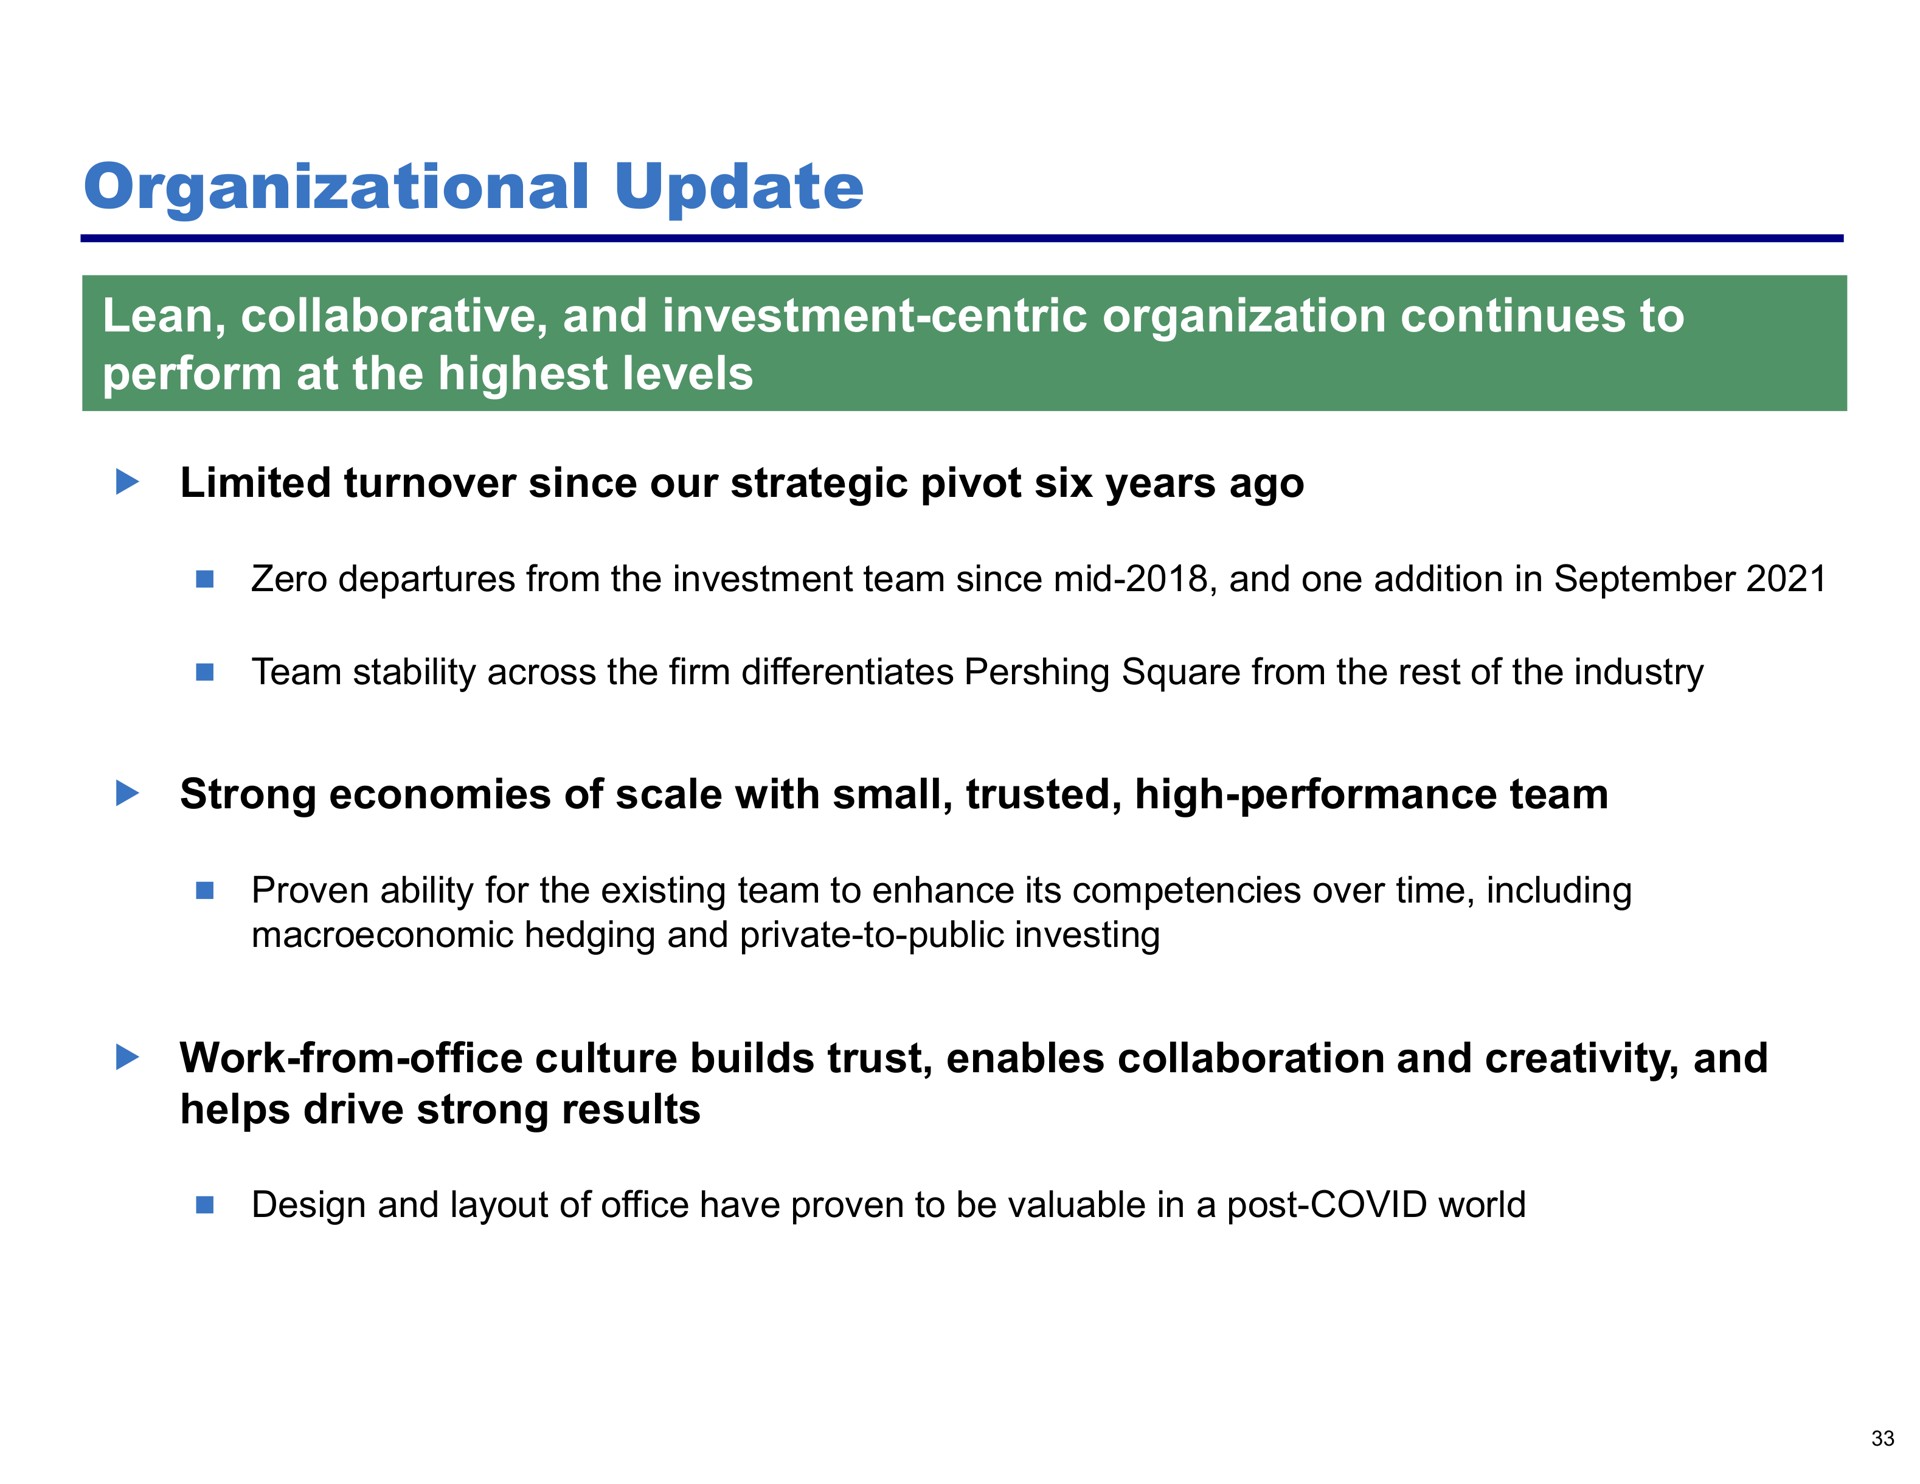 organizational update lean collaborative and investment centric organization continues to perform at the highest levels | Pershing Square